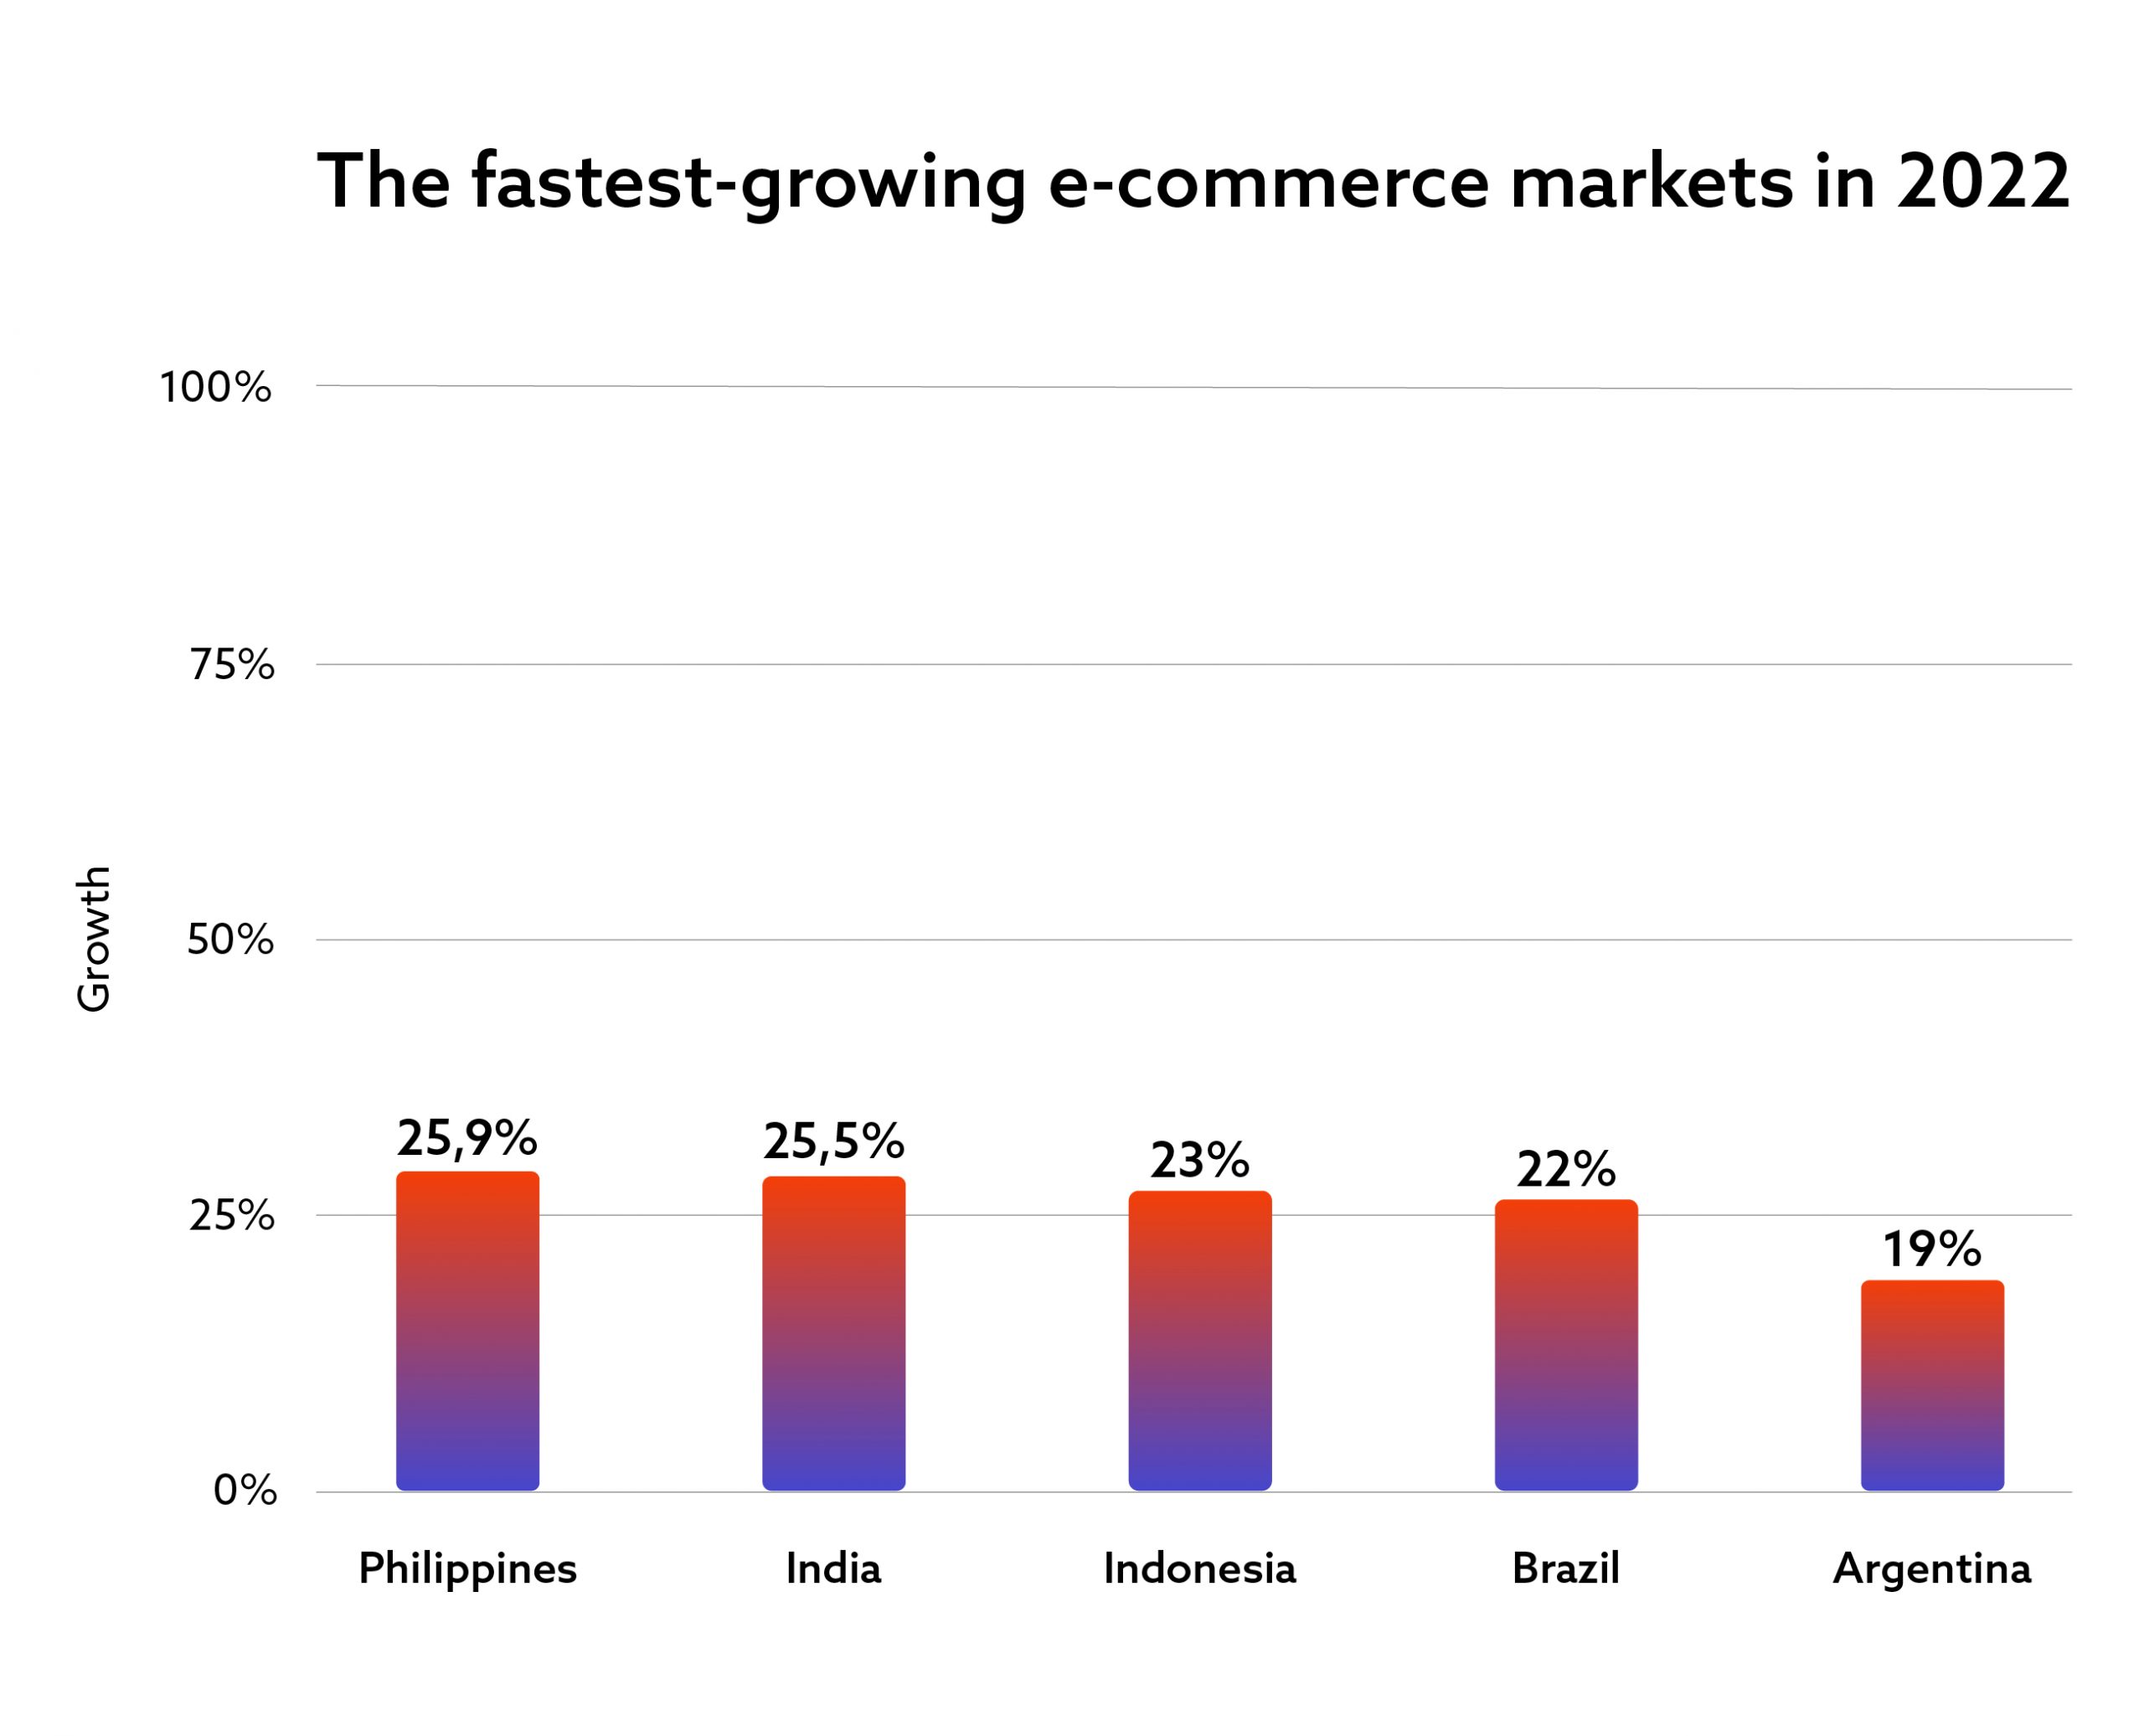 The fastest-growing e-commerce markets in 2022